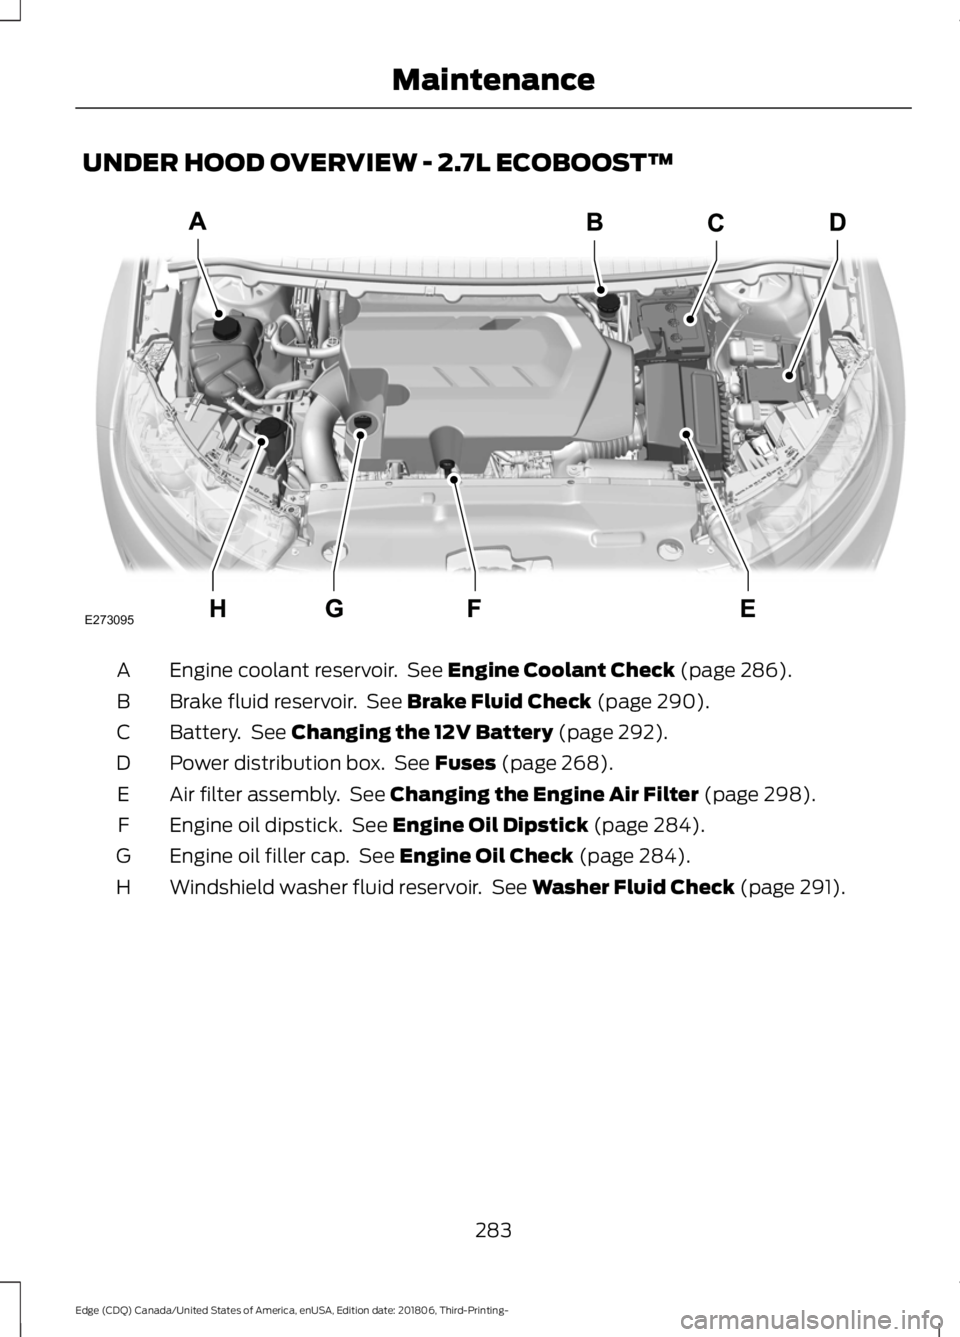 FORD EDGE 2019  Owners Manual UNDER HOOD OVERVIEW - 2.7L ECOBOOST™
Engine coolant reservoir.  See Engine Coolant Check (page 286).
A
Brake fluid reservoir.  See 
Brake Fluid Check (page 290).
B
Battery.  See 
Changing the 12V Ba